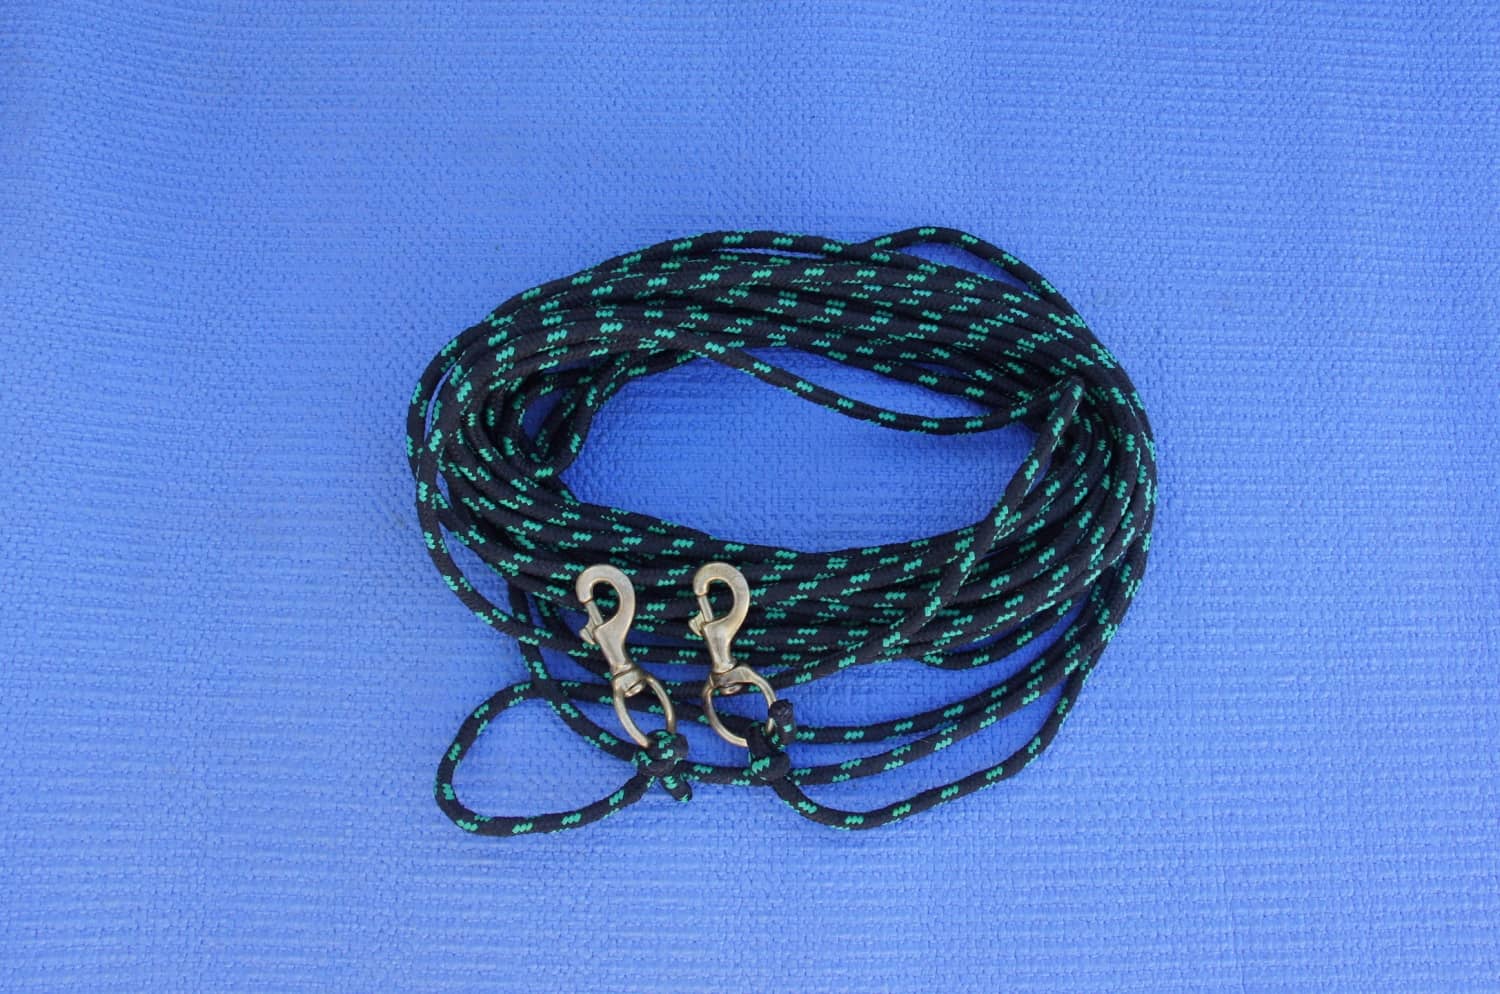  Coiled rope with breeze clips connected to each end